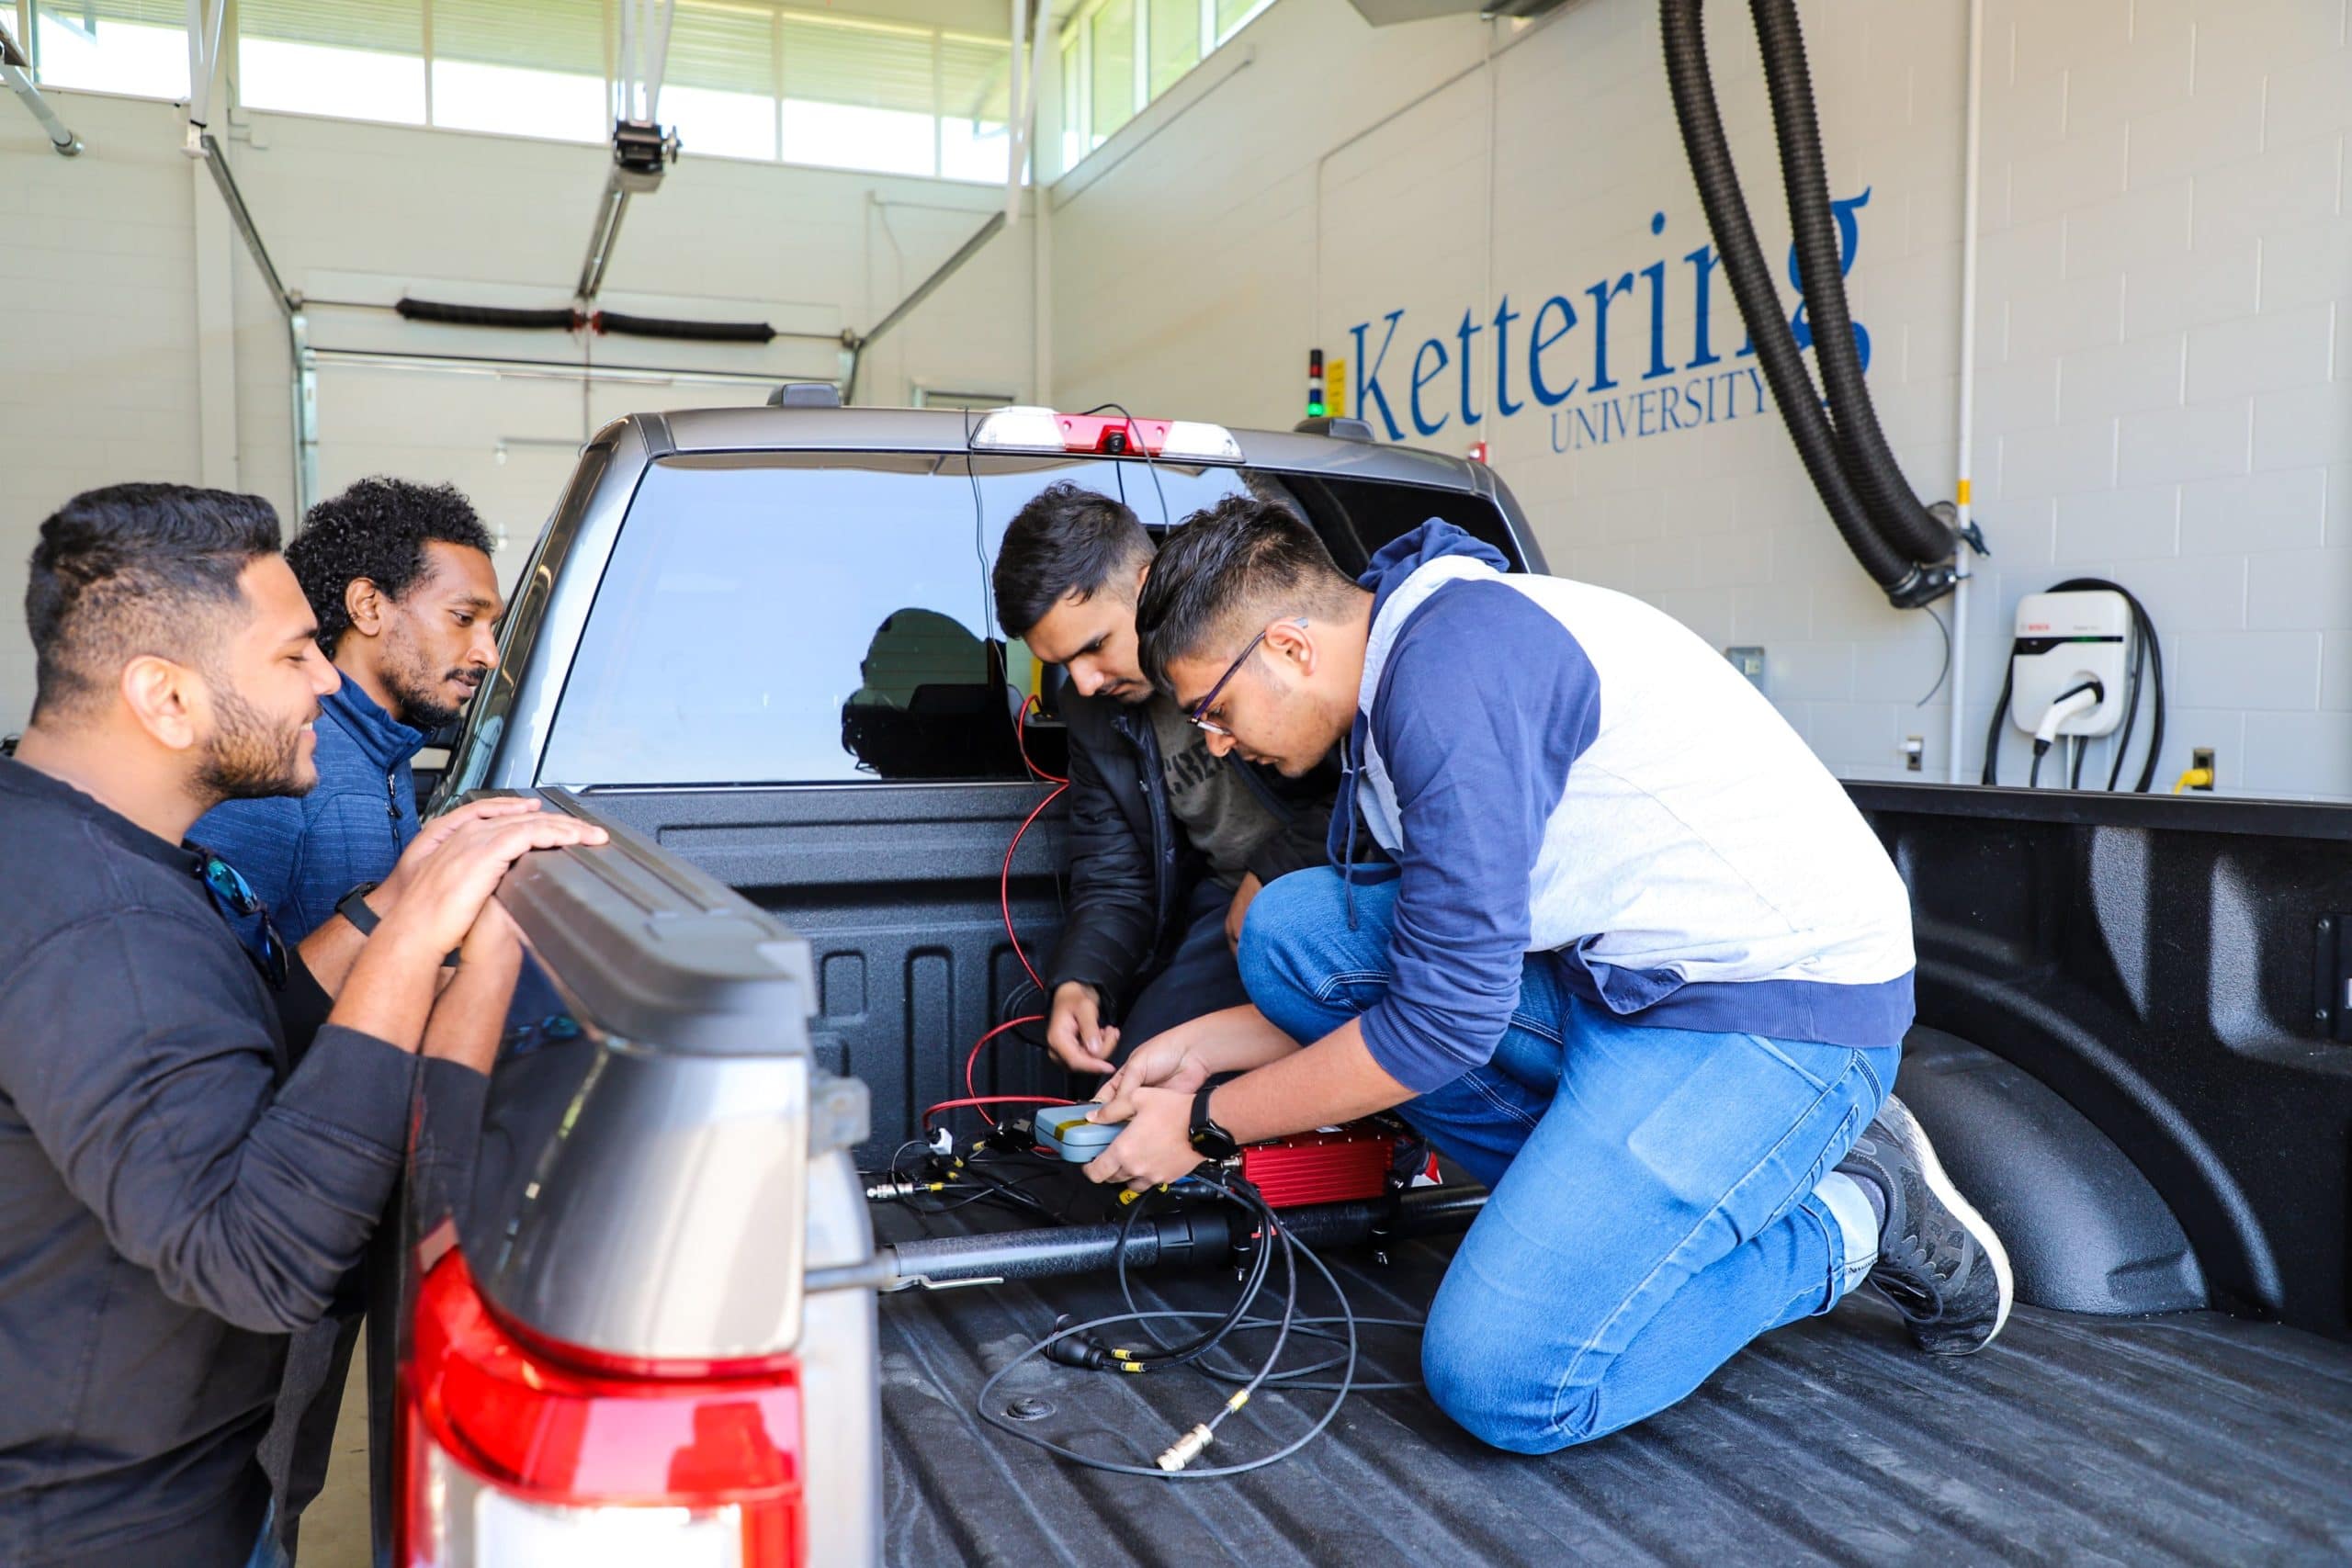 Kettering University tested AEB systems